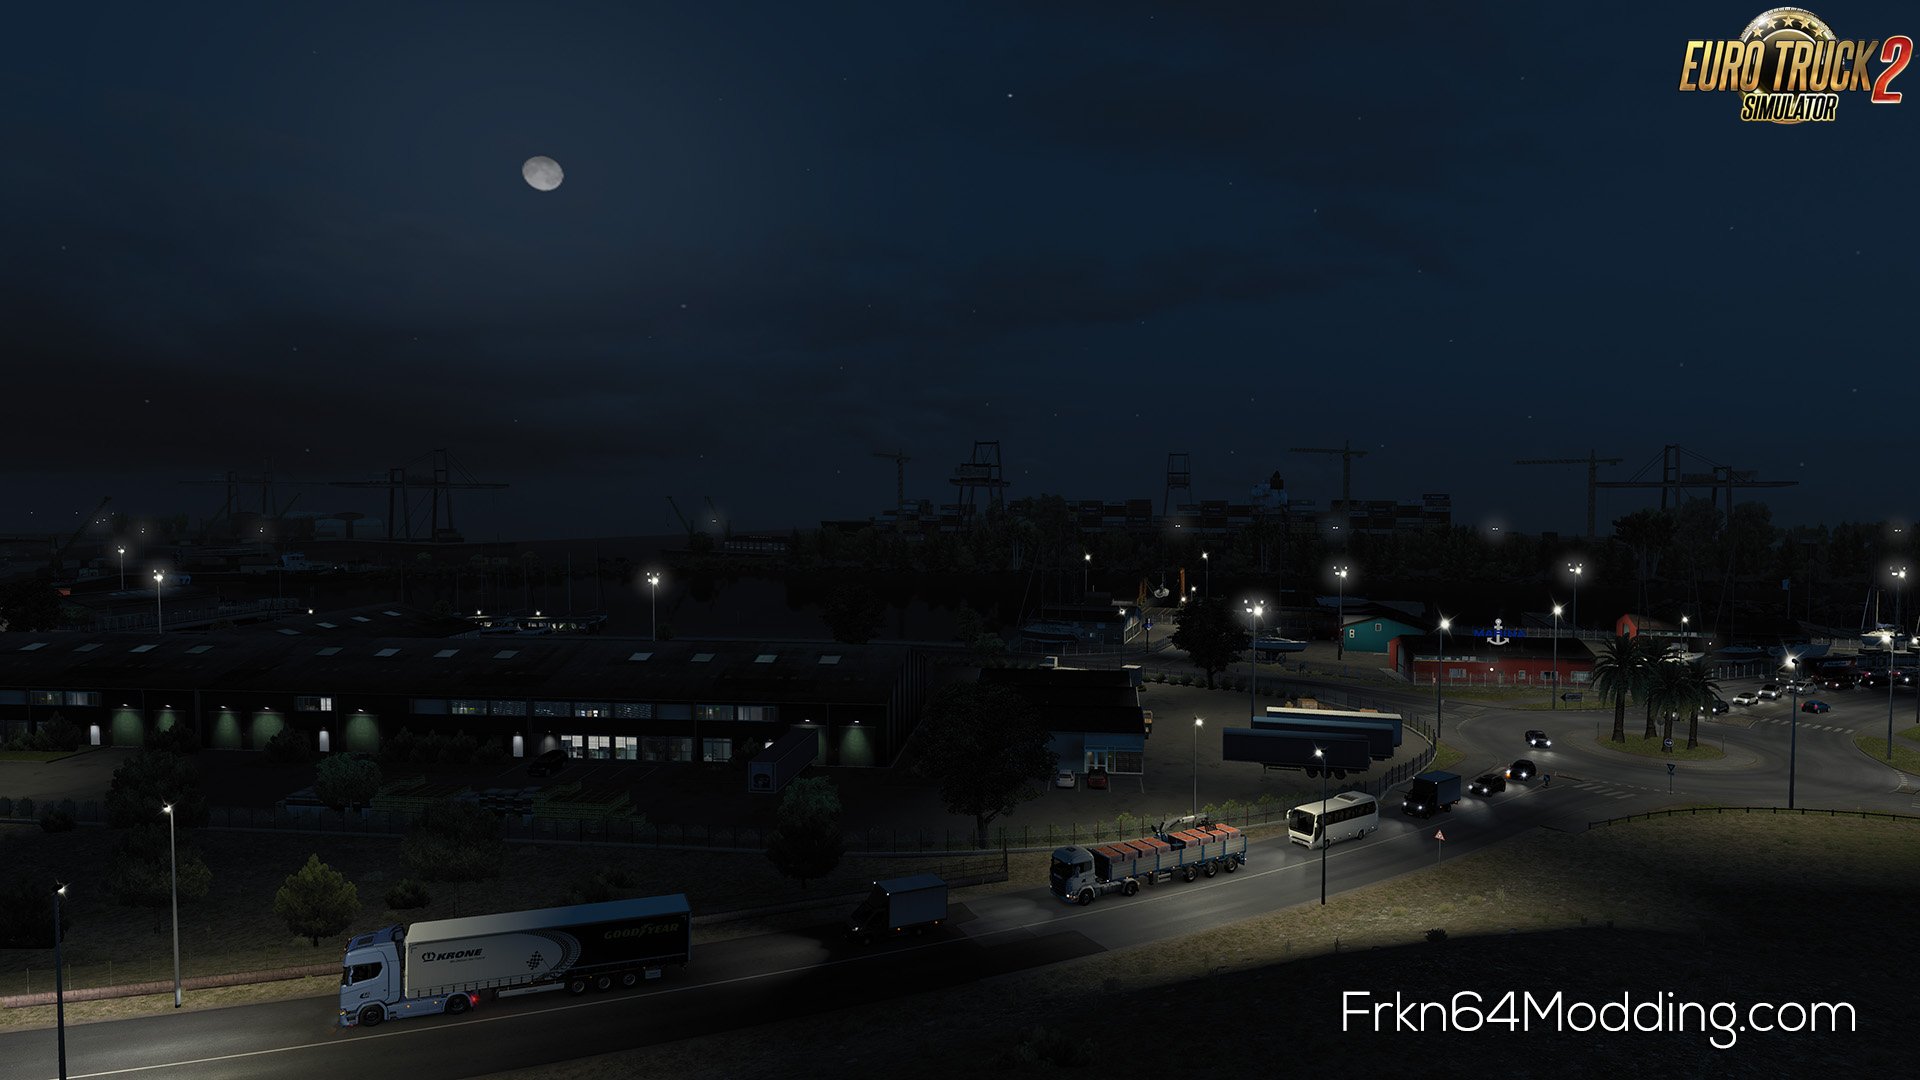 Realistic Graphics Mod v3.0 by Frkn64 (1.35.x) for ETS2